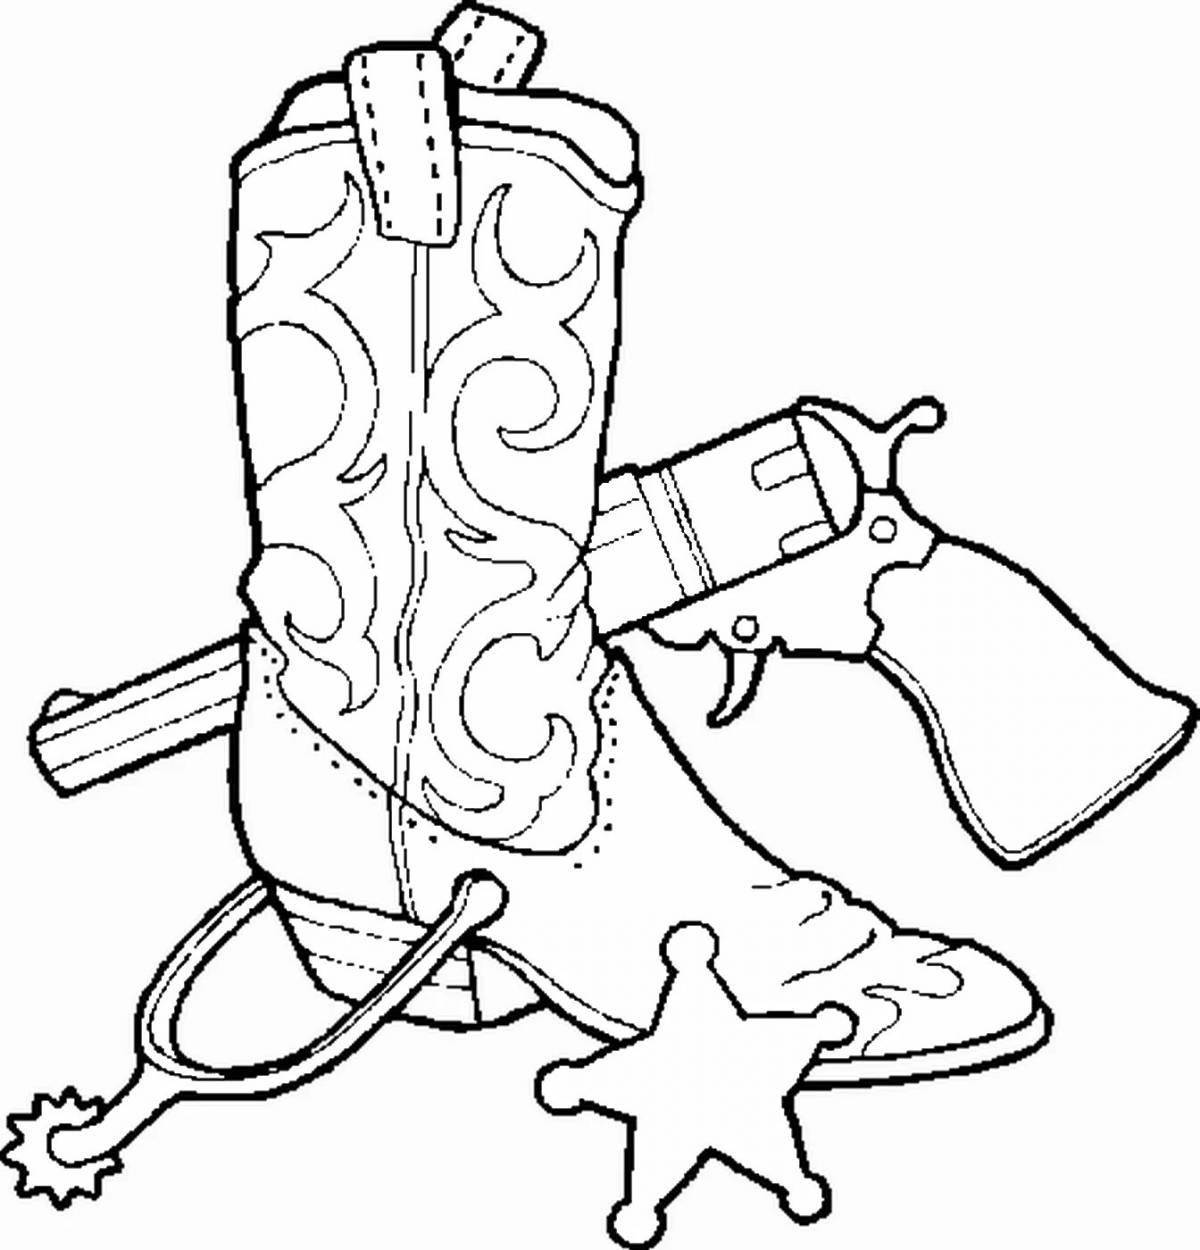 Pretty boot coloring page for preschoolers